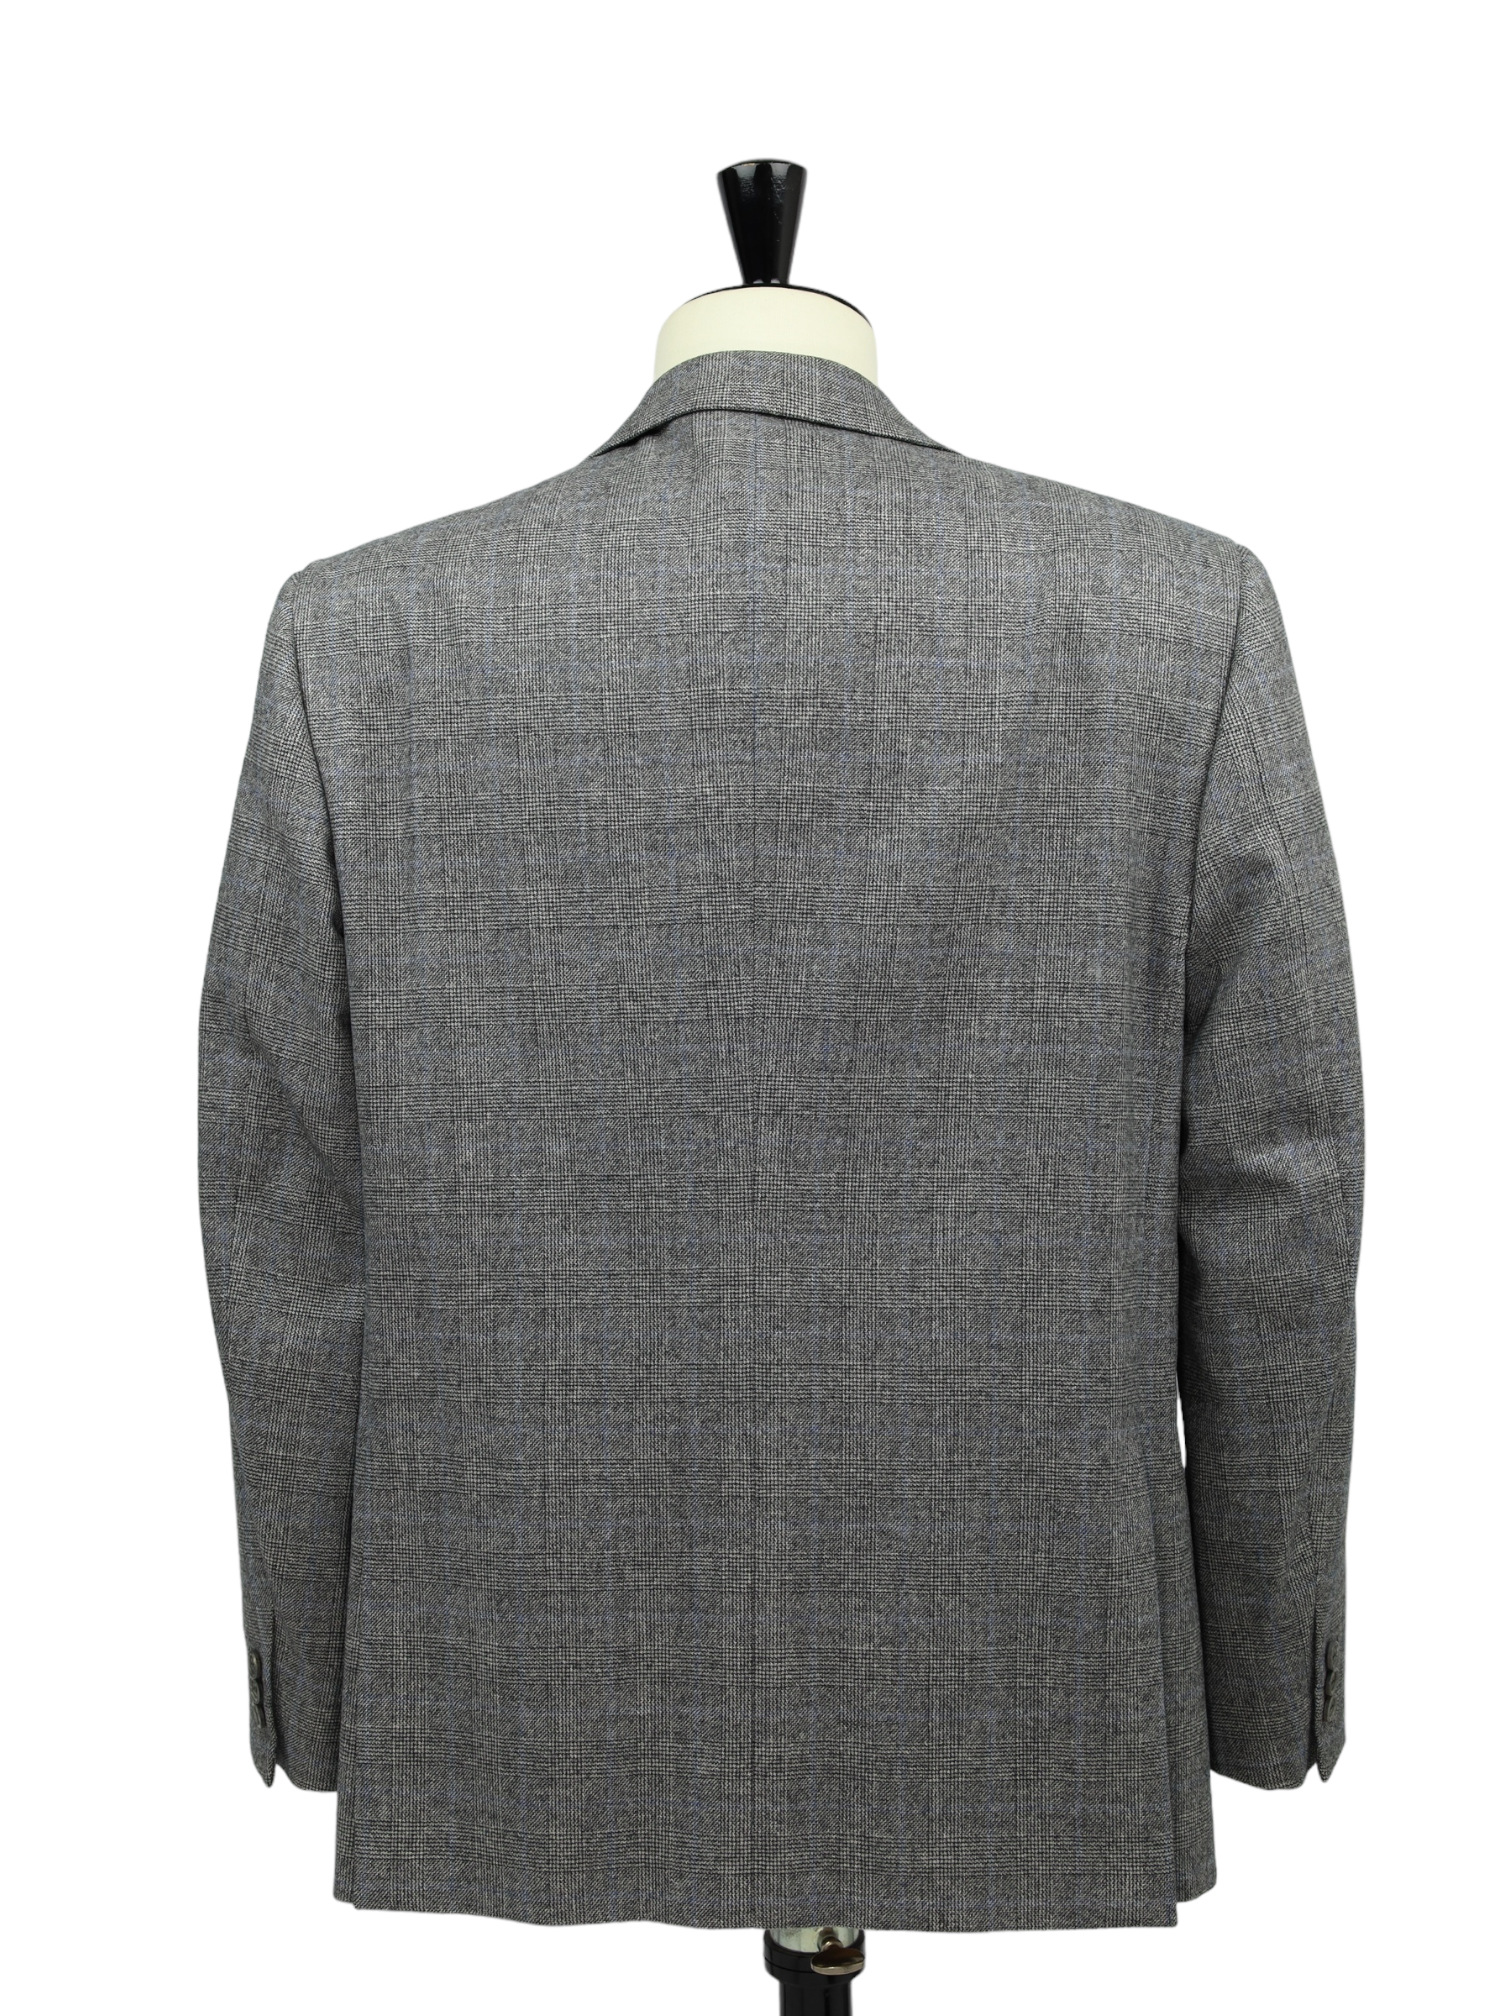 Brioni Grey Prince of Wales Check Flannel Nomentano Suit